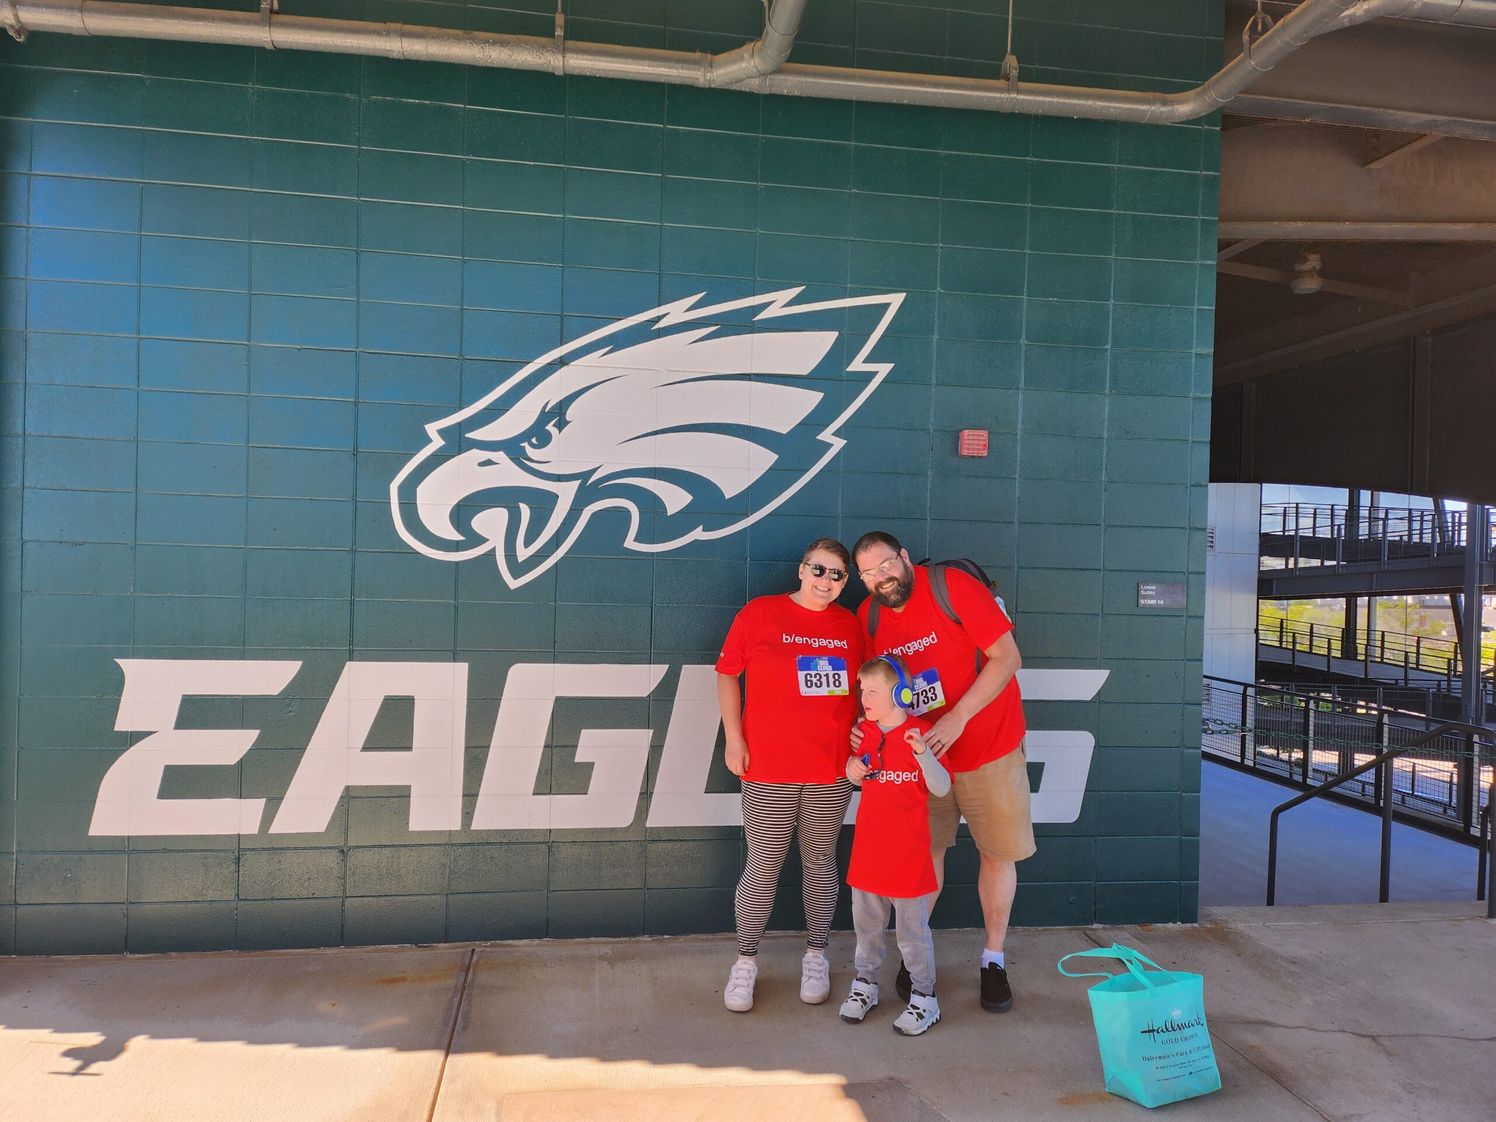 Group photo of Ballinger associate with family at Eagles game